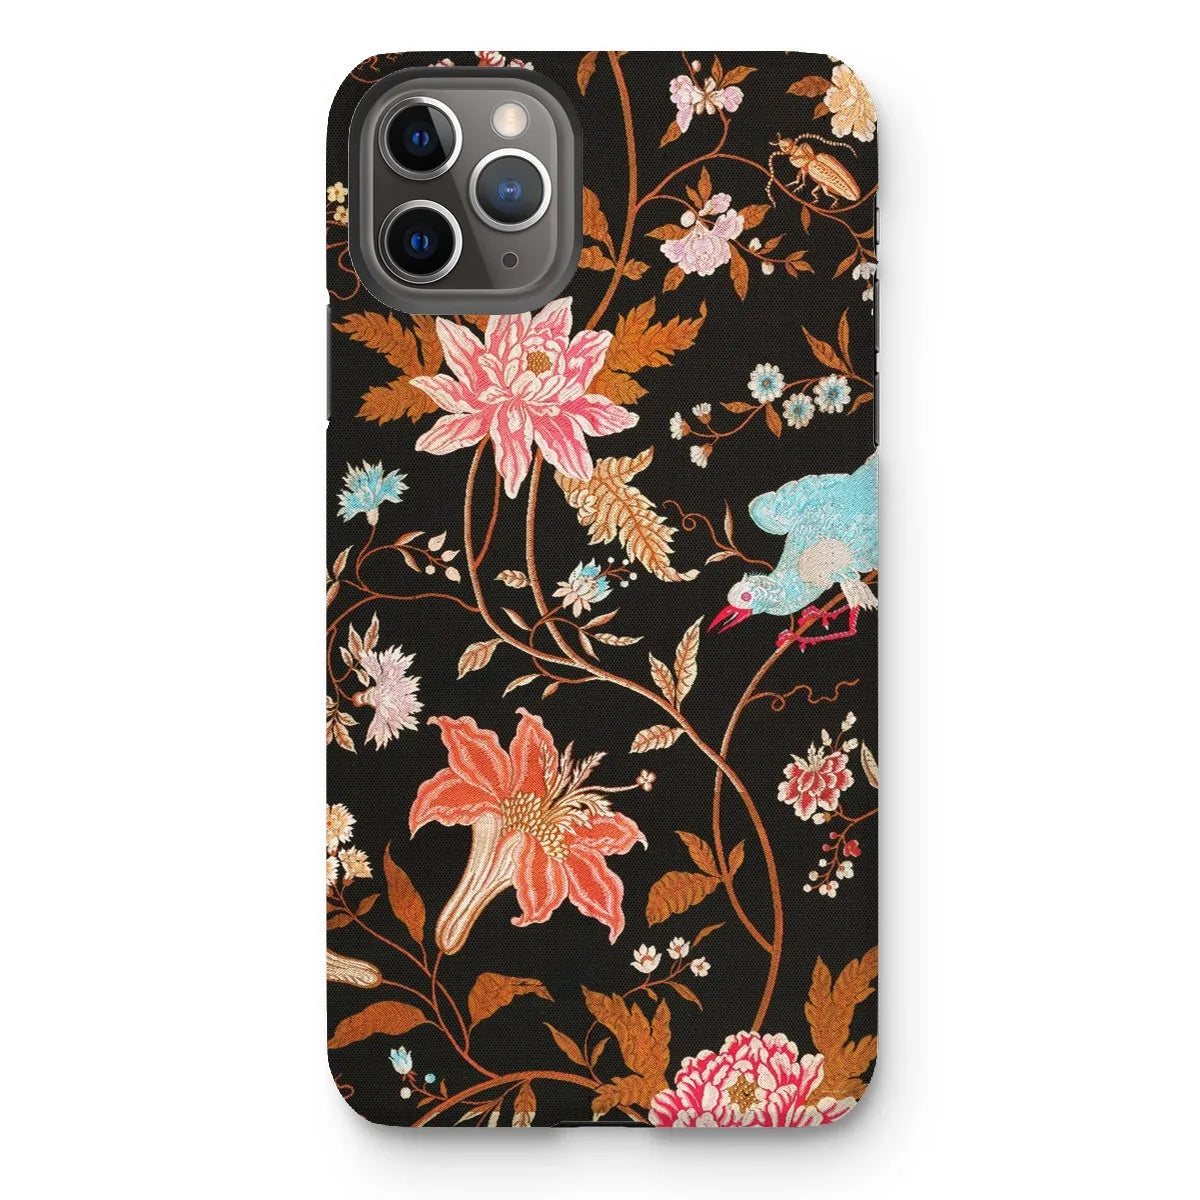 Midnight Call - Indian Aesthetic Fabric Art Phone Case - Iphone 11 Pro Max / Matte - Mobile Phone Cases - Aesthetic Art